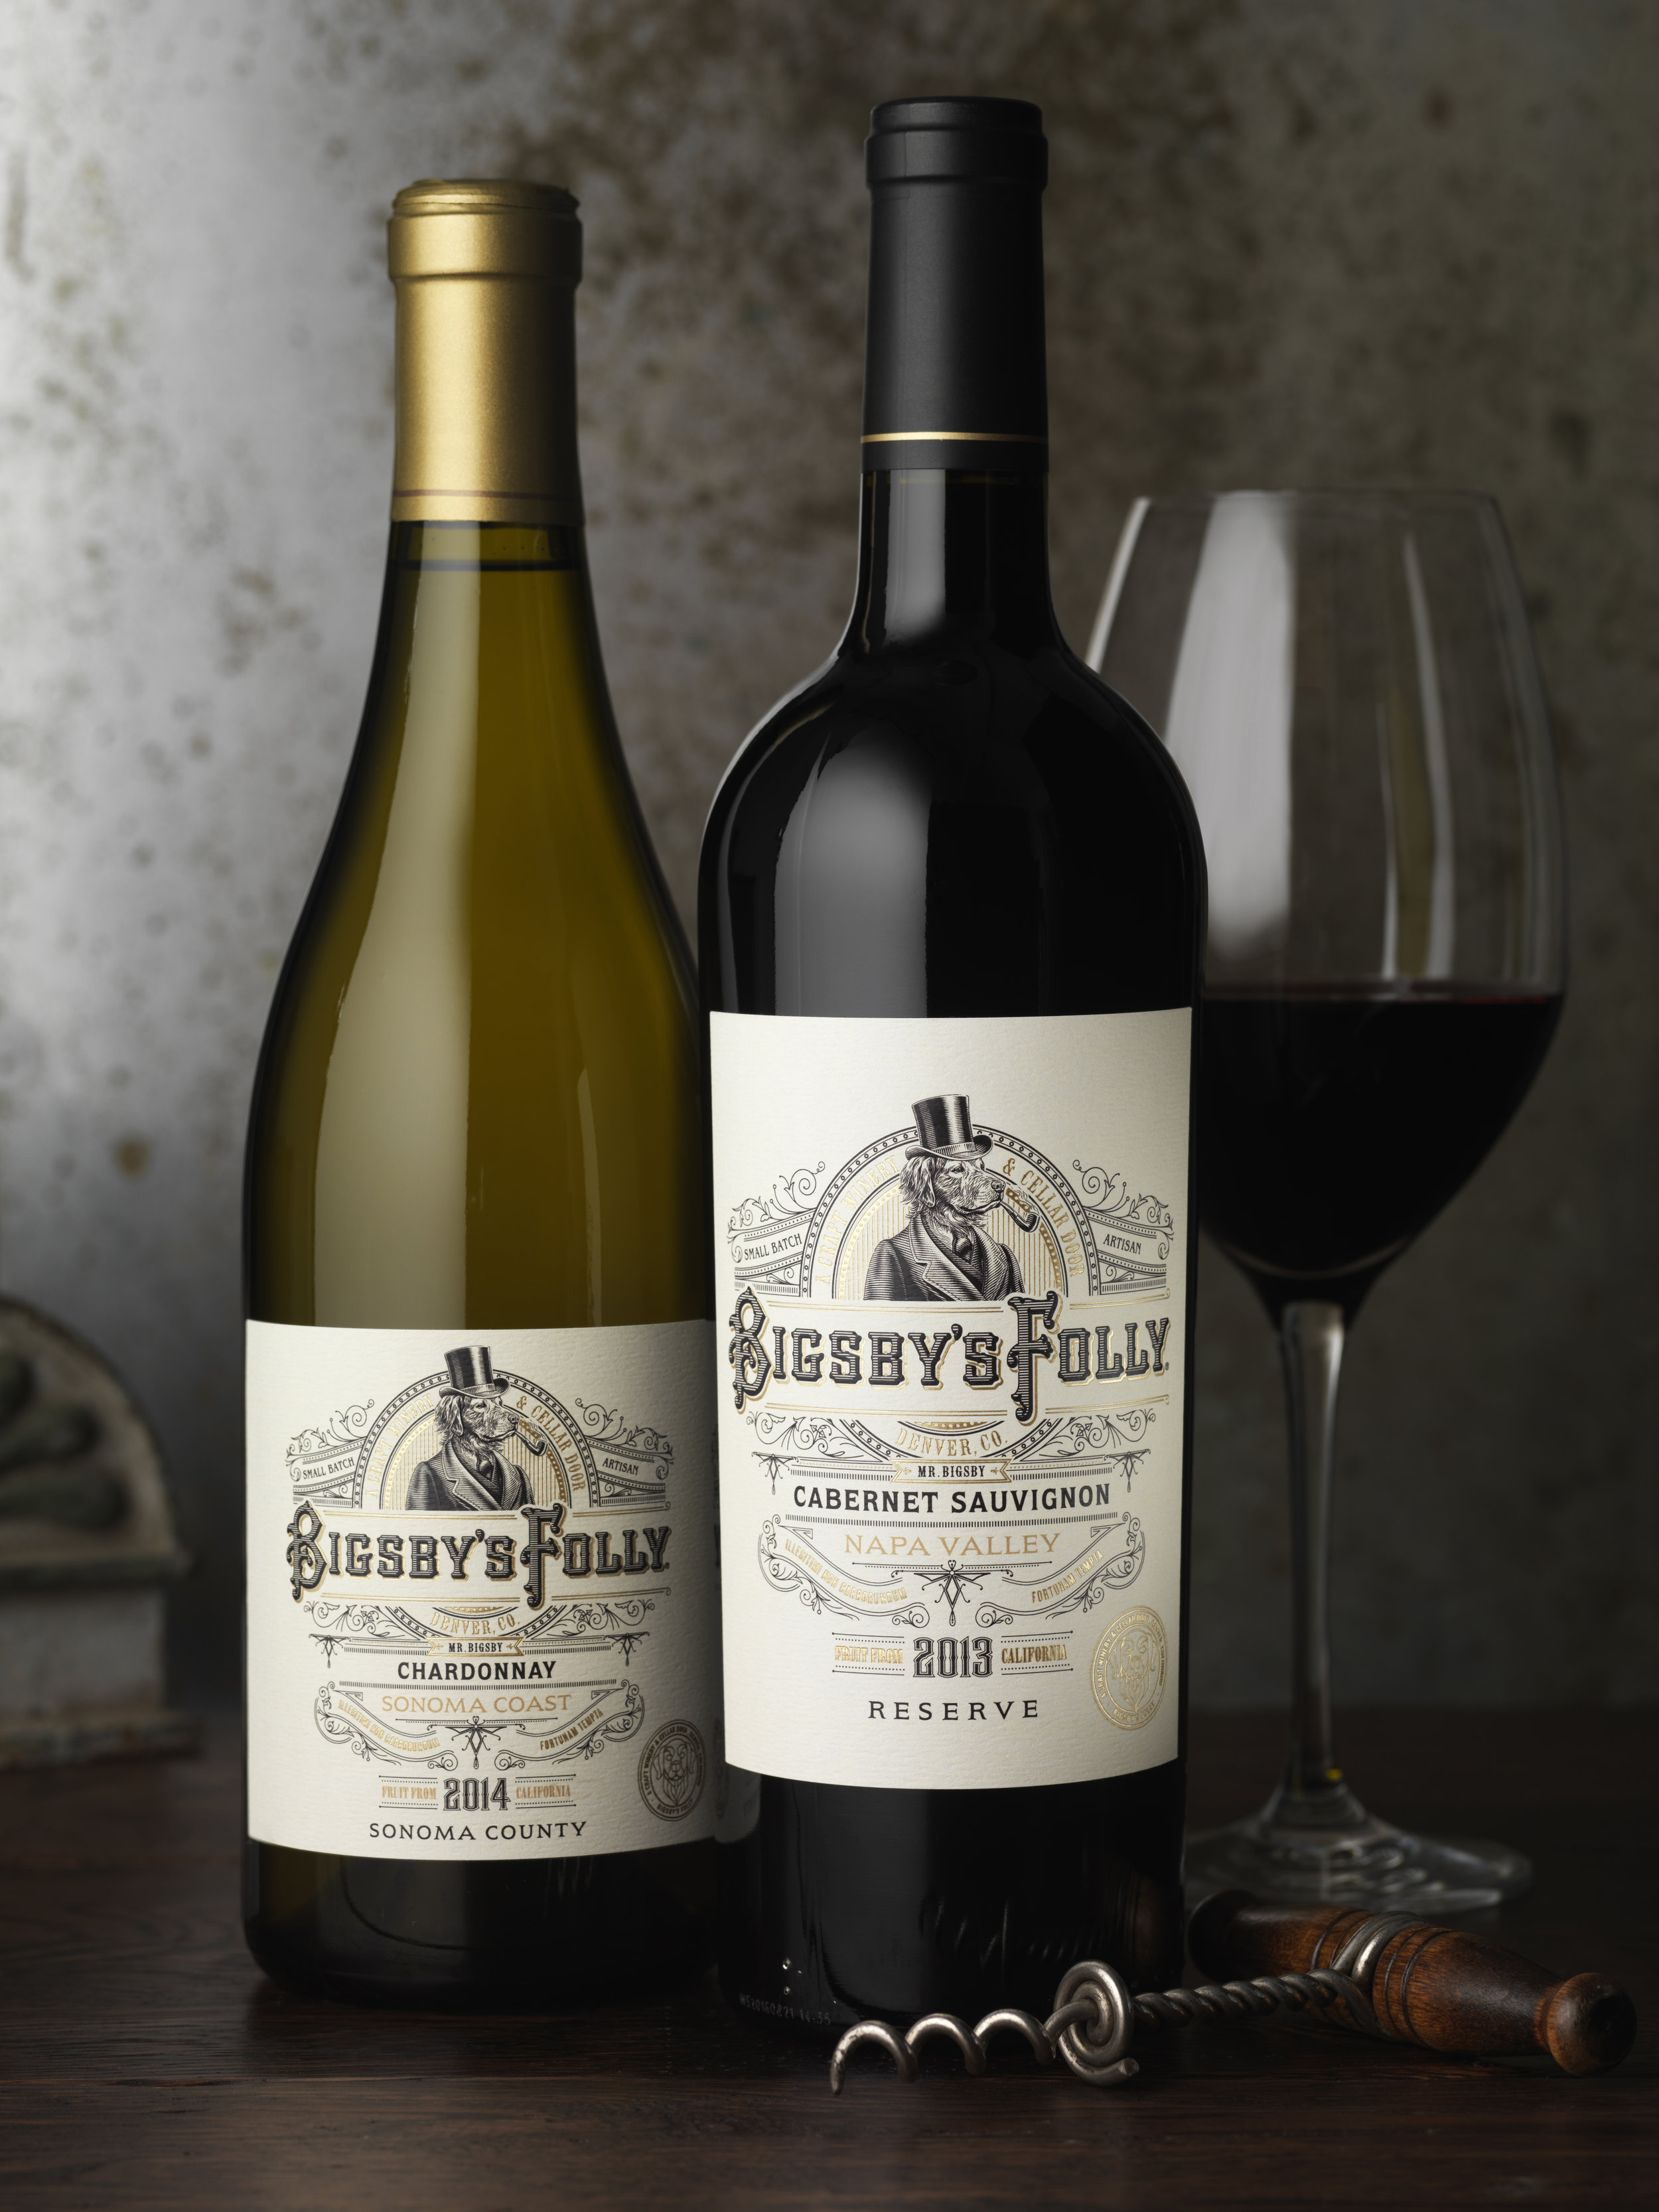 CF Napa Brand Design for Bigsby’s Folly Winery